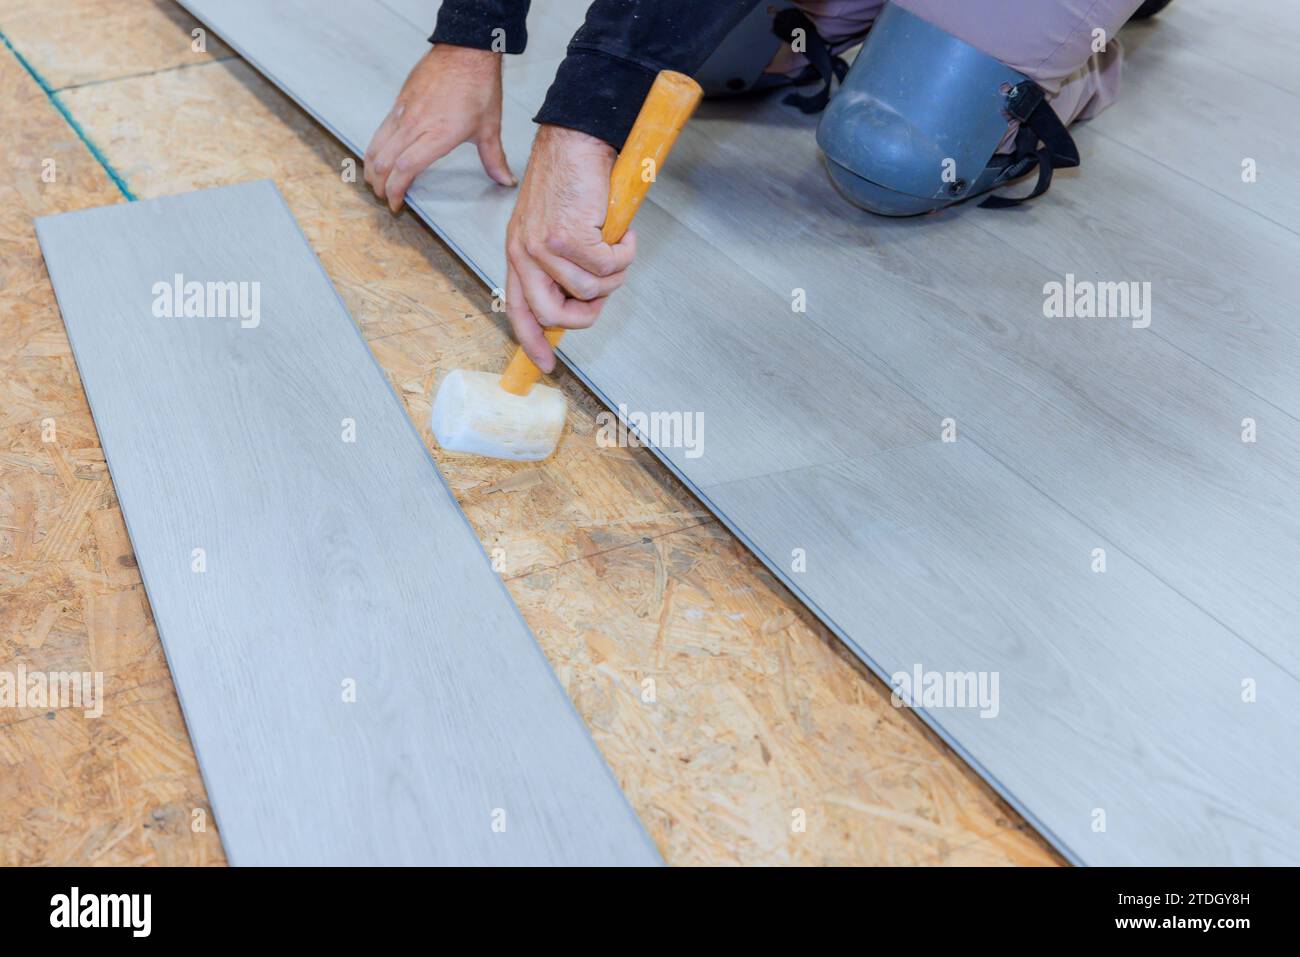 In newly constructed house worker is installing vinyl laminate flooring Stock Photo